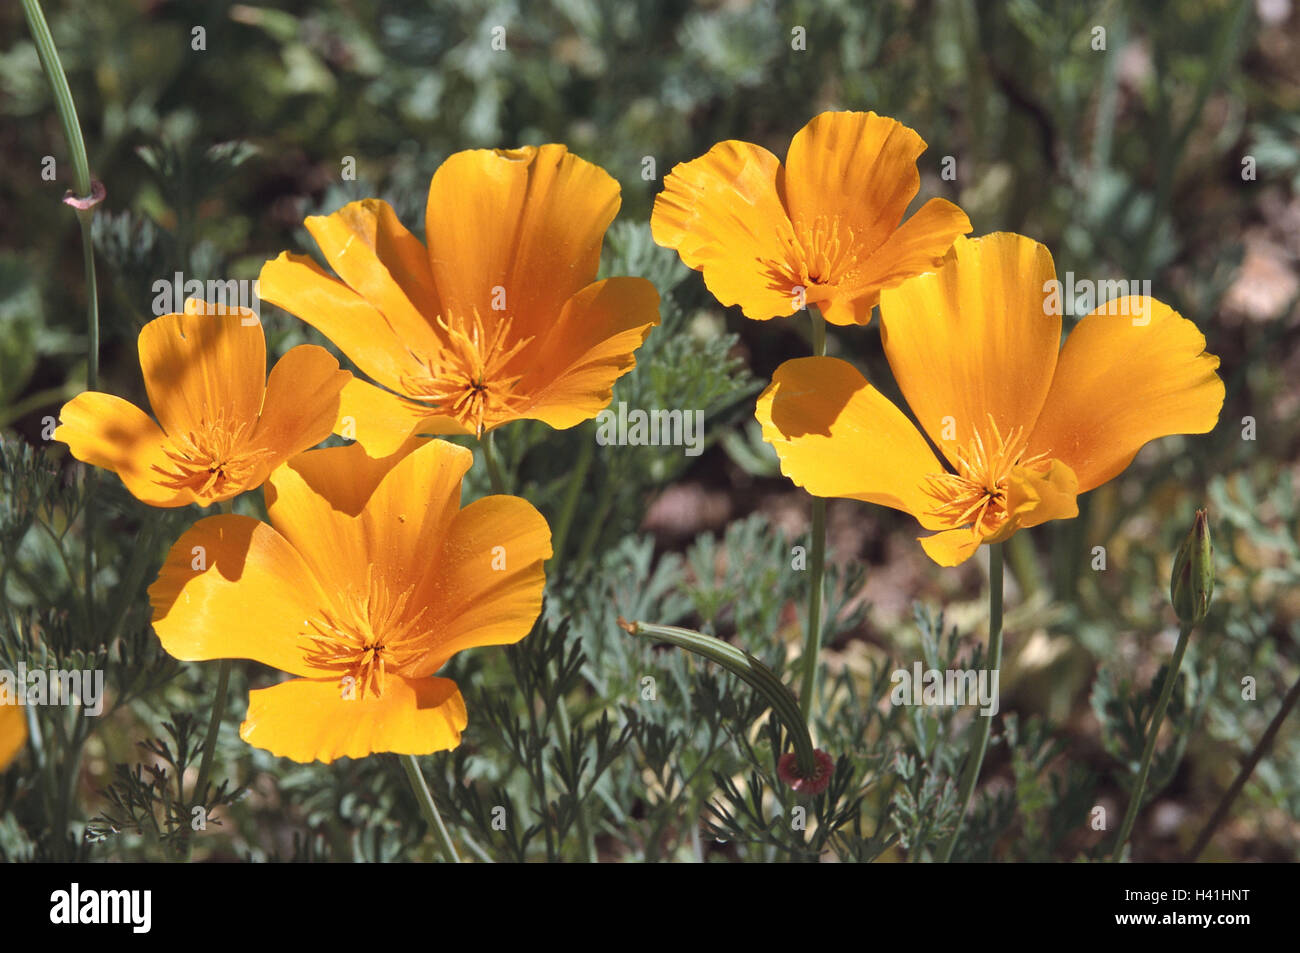 Meadow, golden poppy seed, Eschscholtzia, californica, blossoms, yellow, plants, medicinal plants, poppy seed plants, Papaveraceae, poppies, poppy seed, little sleepyhead, Californian poppy seed, California Poppies, blossom, nature, botany, Stock Photo